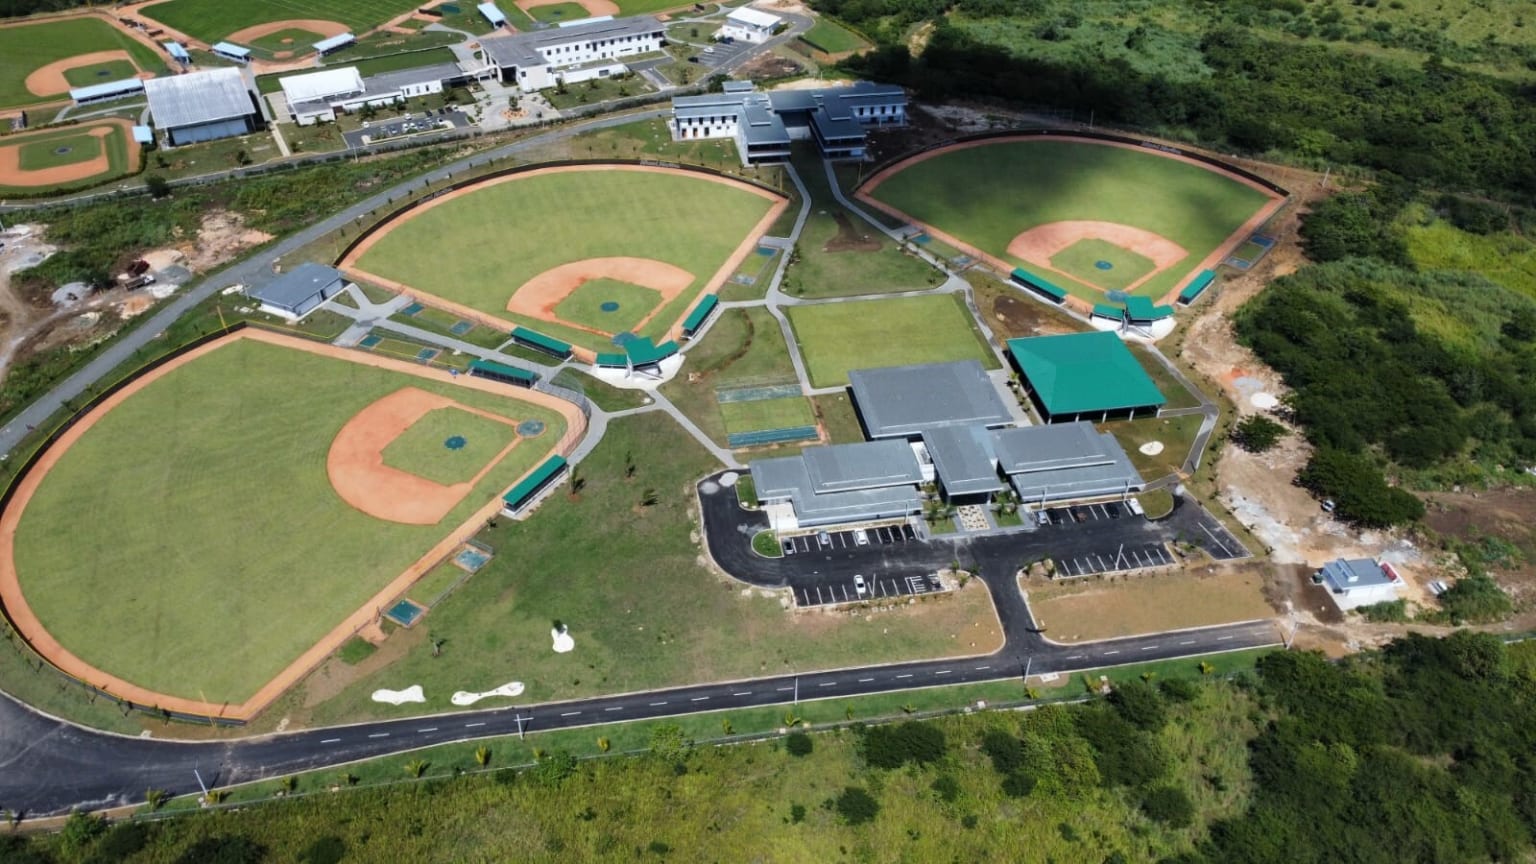 An aerial view of three baseball fields and several buildings